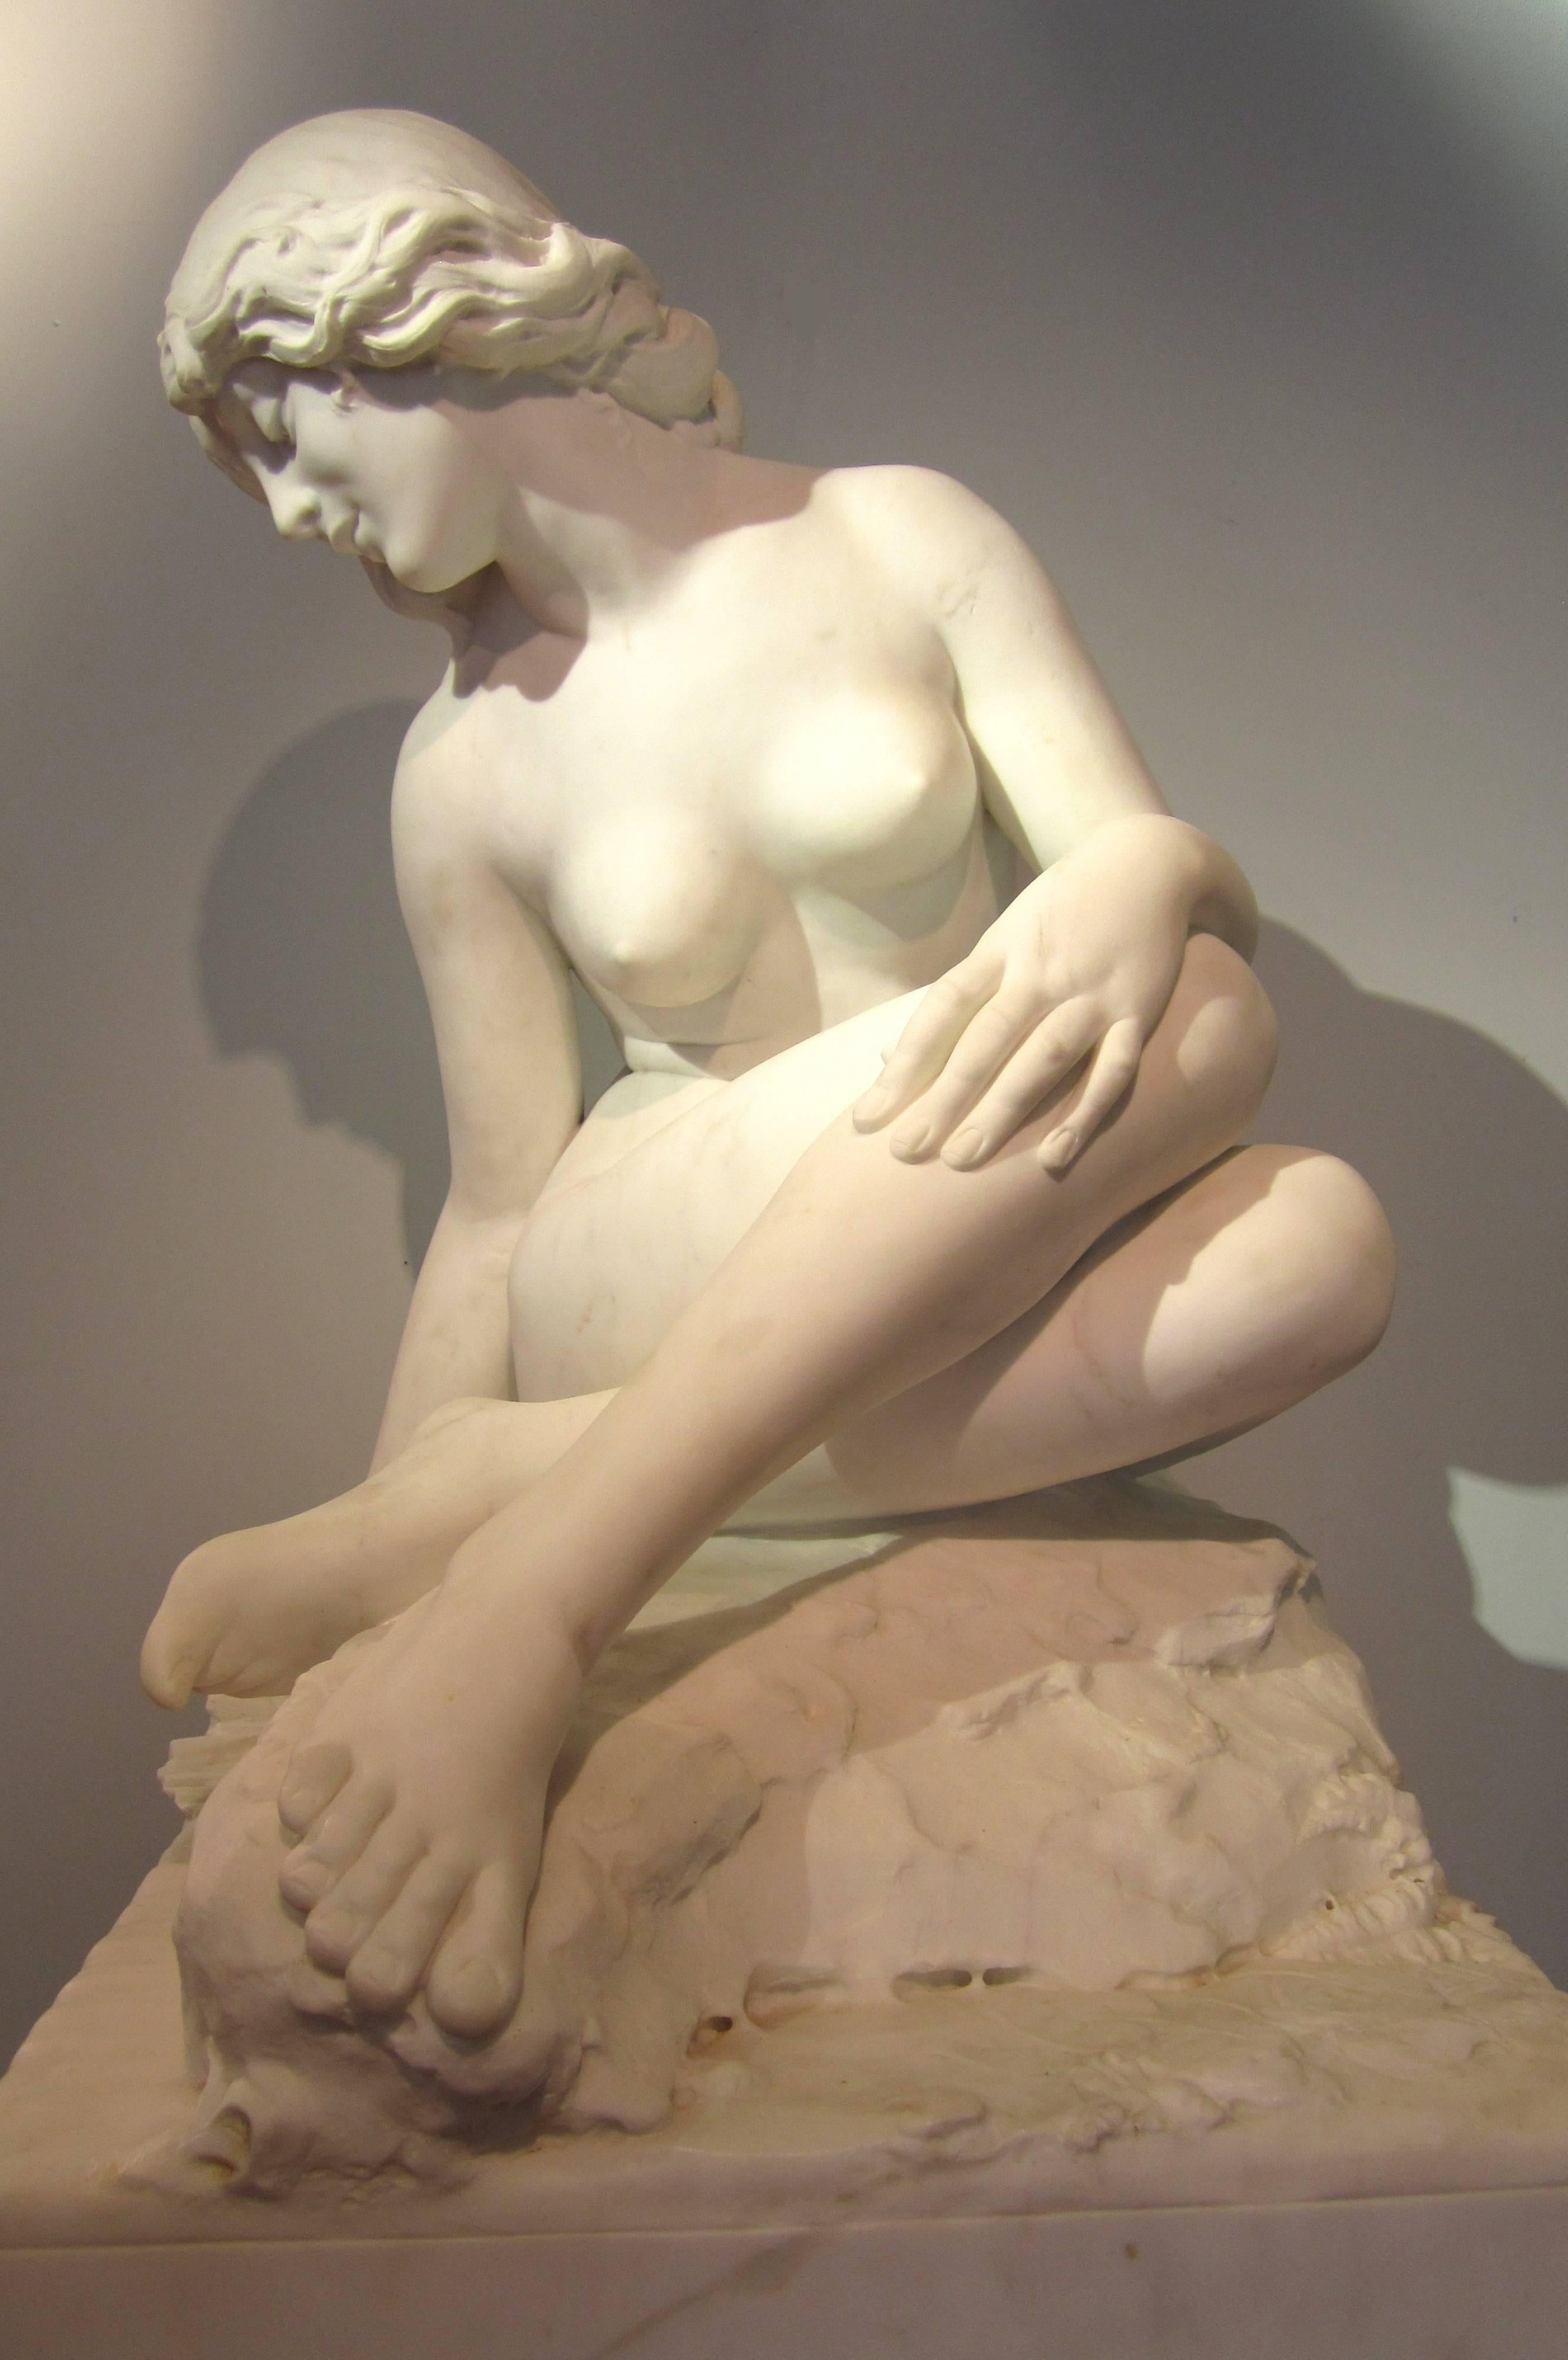 White Marble Figurative Statue 'Nymph at a Well' by C. Pittulaga  - Sculpture by Carlo Pittaluga